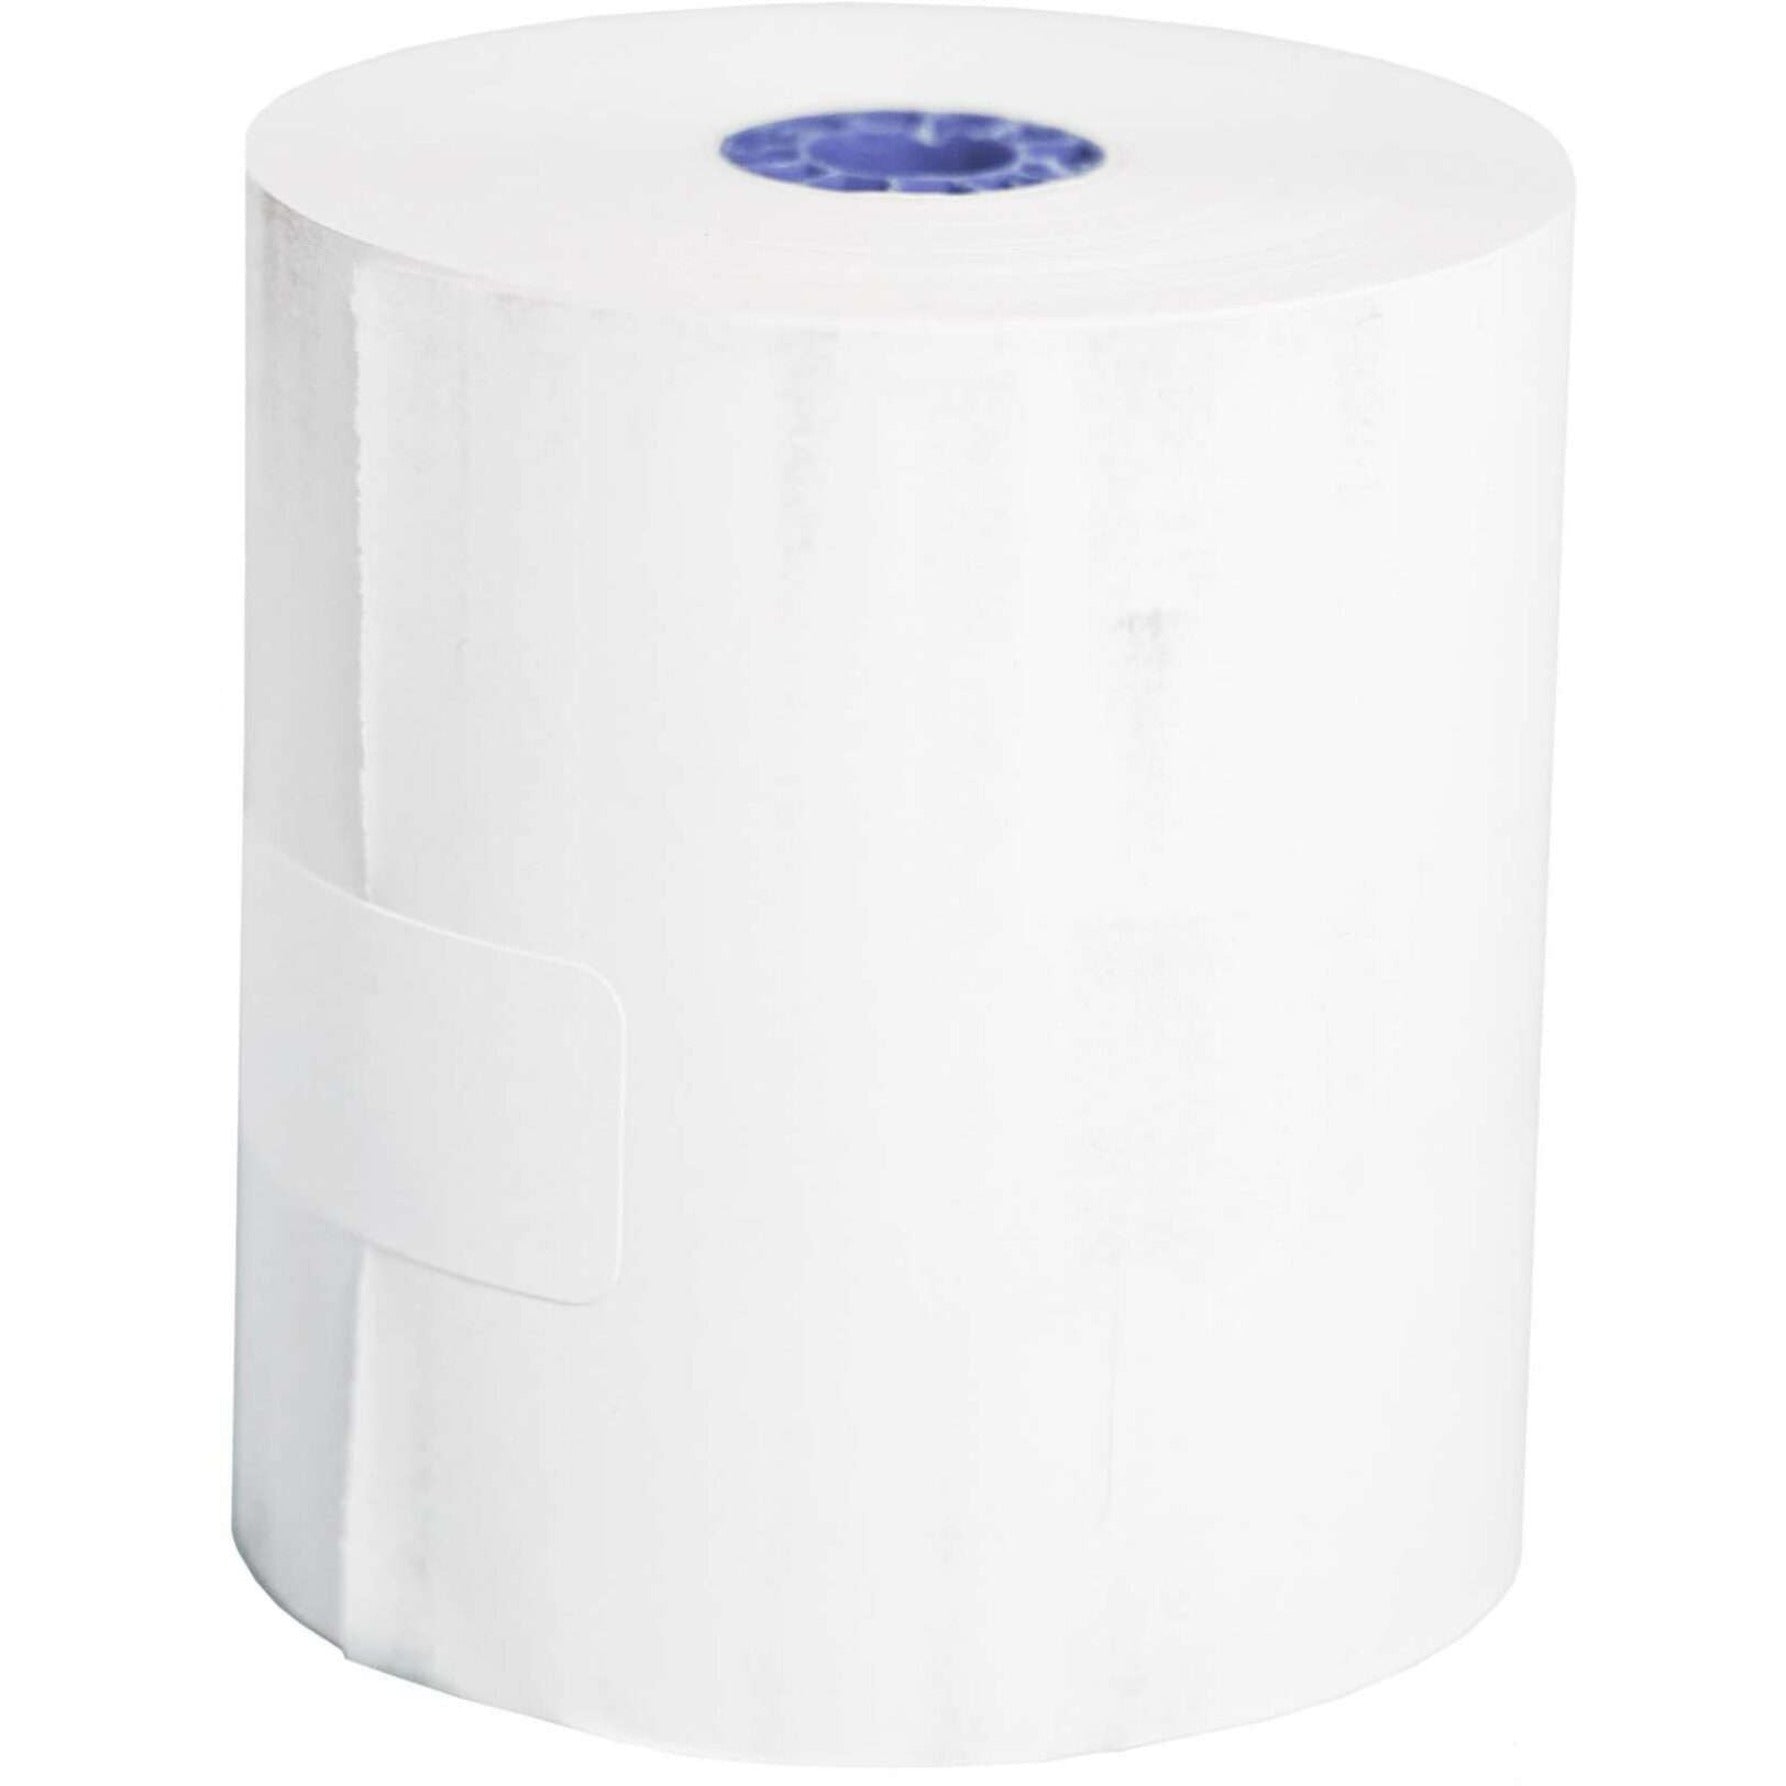 Star Micronics 37966290 Thermal Paper, 3 5/32 x 230 ft, 25 Roll